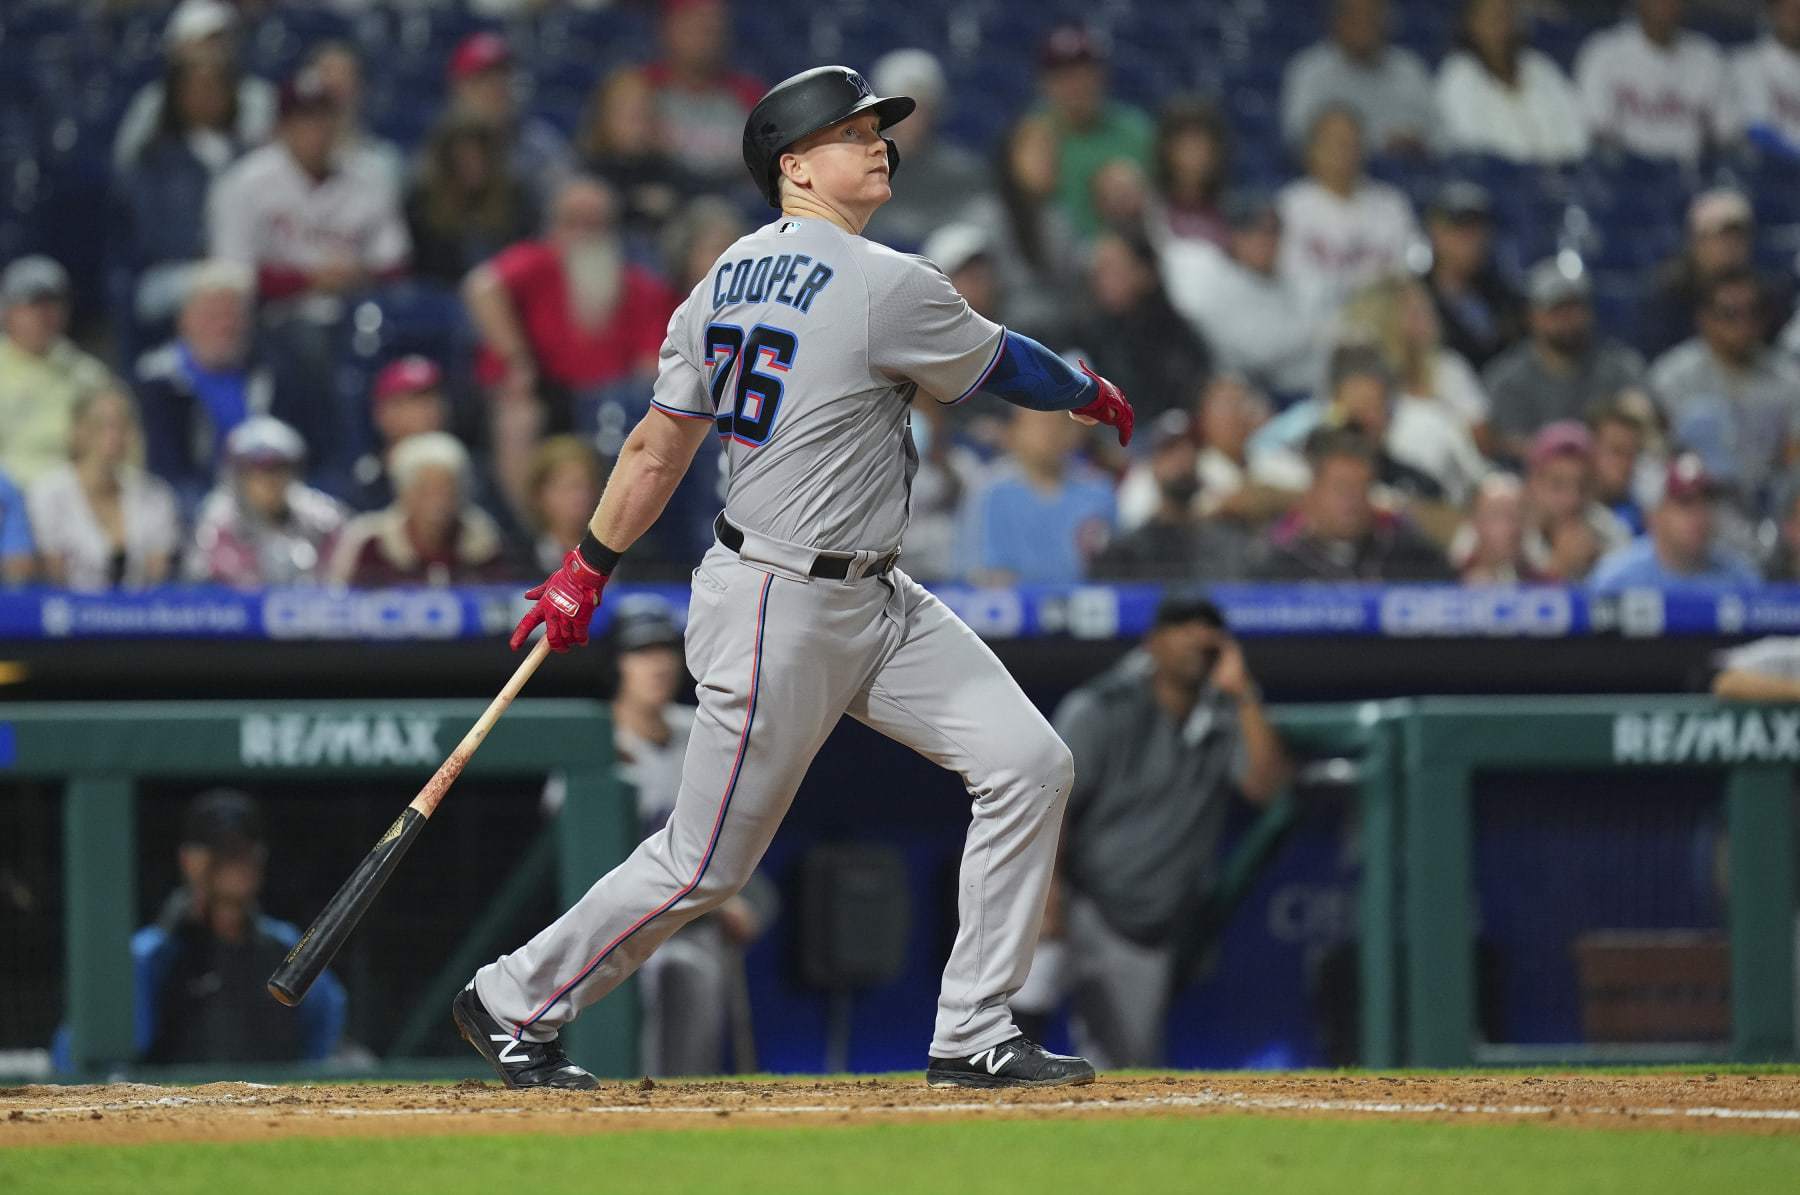 HS 199: Rhys Hoskins' swing will be fine after the Home Run Derby